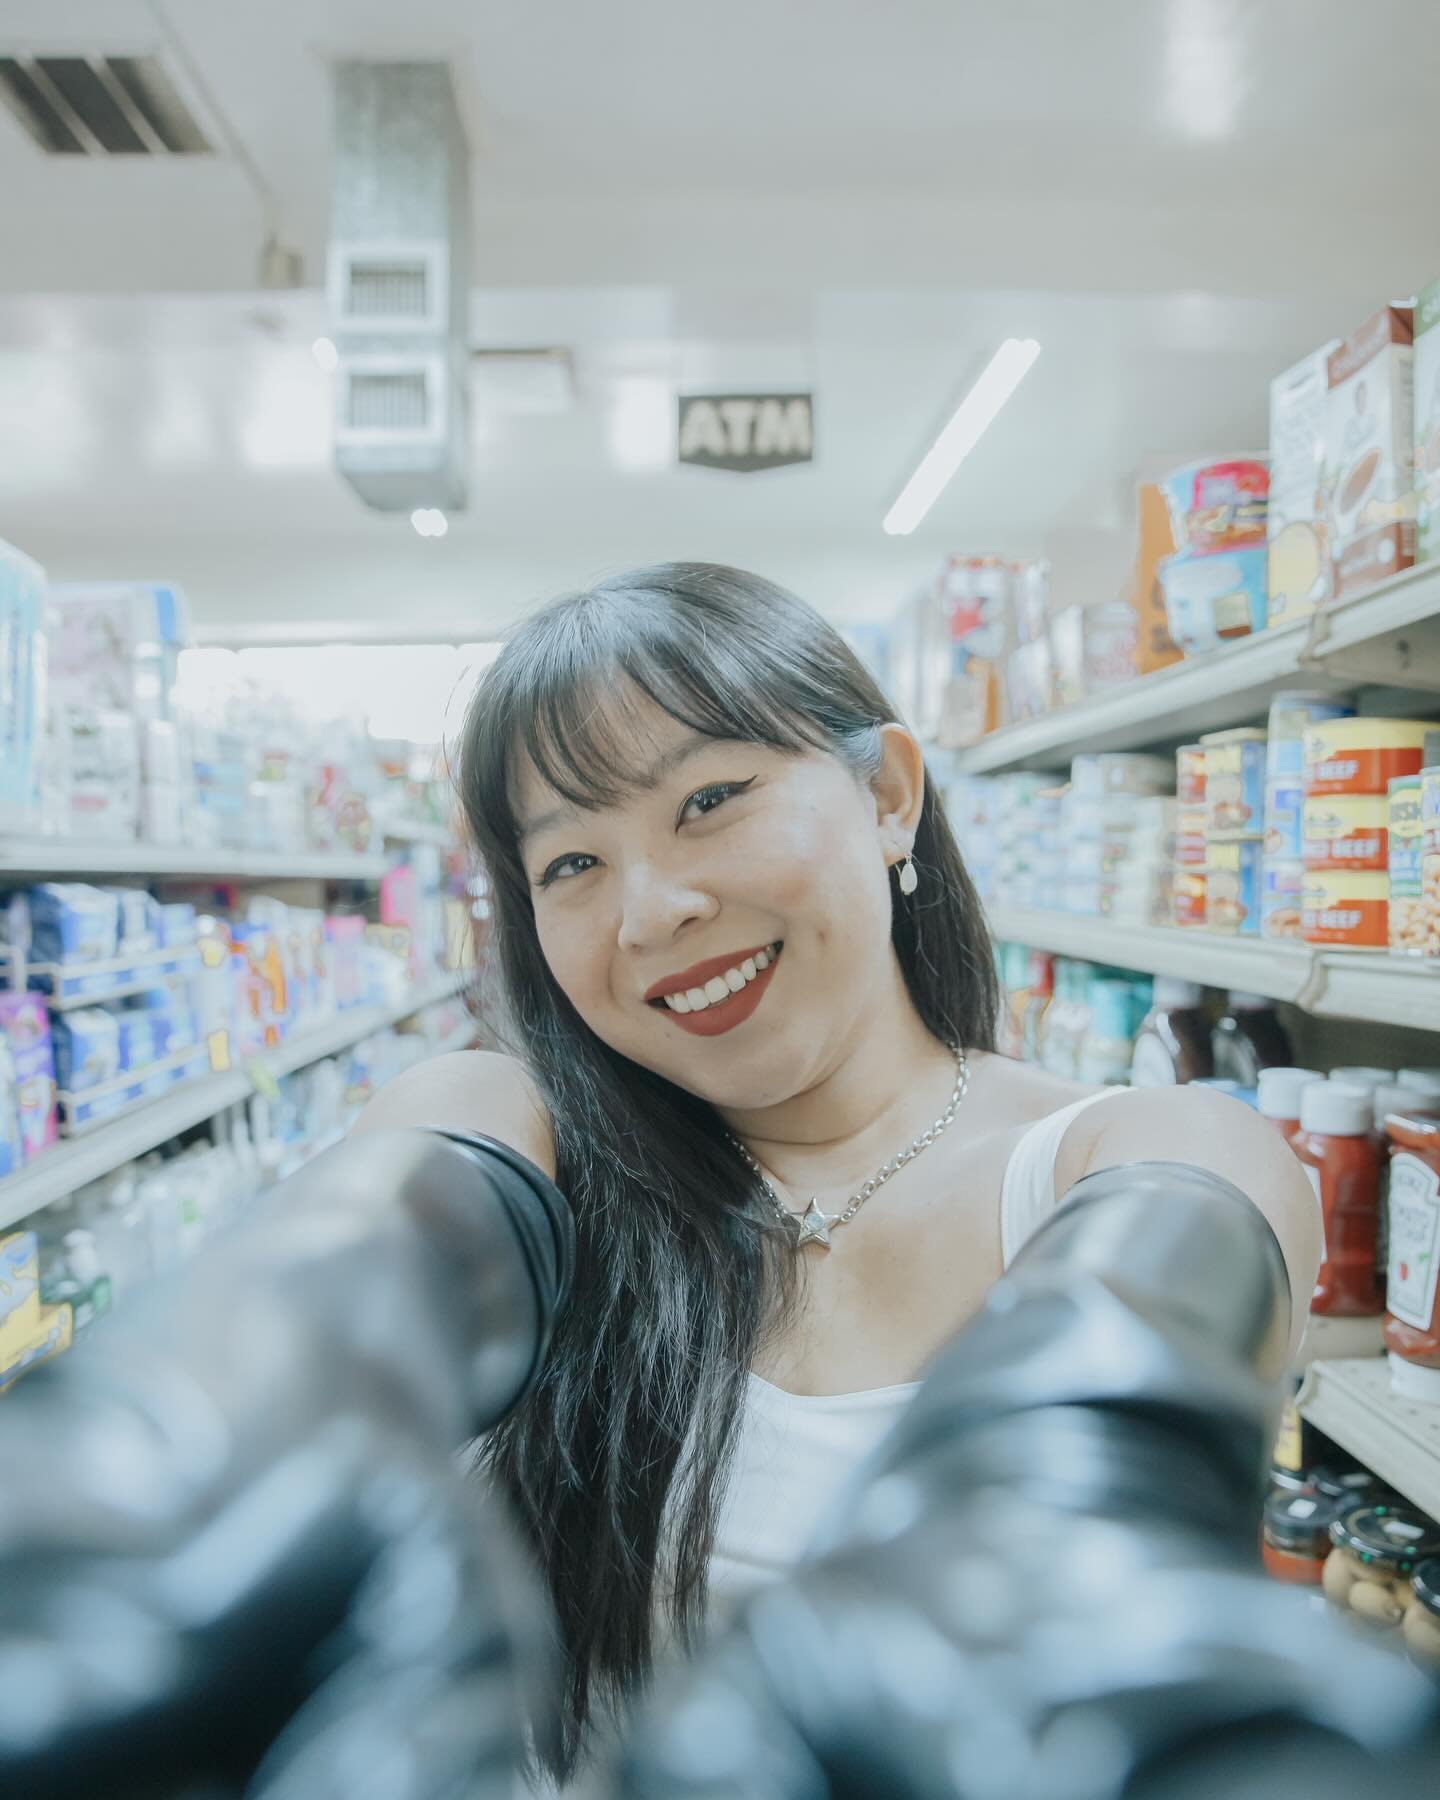 good 4 u, i guess you moved on really easily!!!

happy 3 year anniversary to @oliviarodrigo&rsquo;s &ldquo;good 4 u&rdquo; music video! i got to visit the actual liquor store she filmed in and was totally geeking out! 💜

outfit details:
top - @amazo